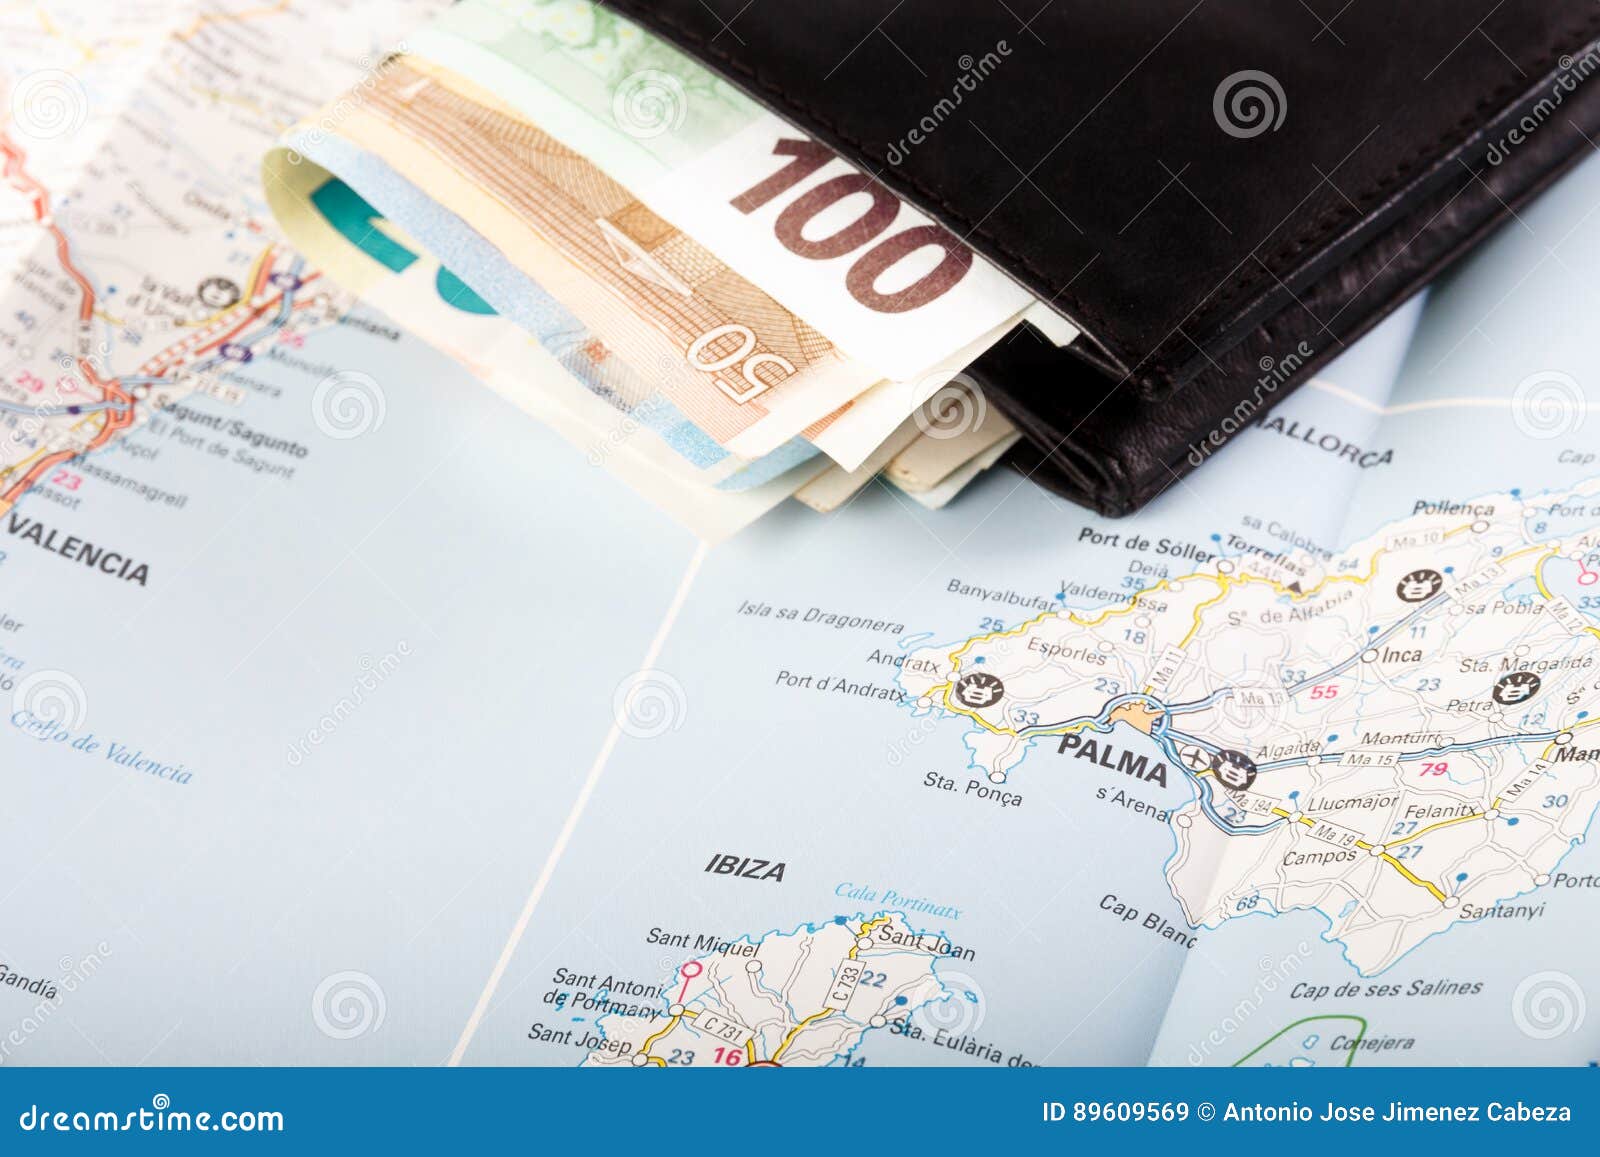 european union currency in a wallet on a map background